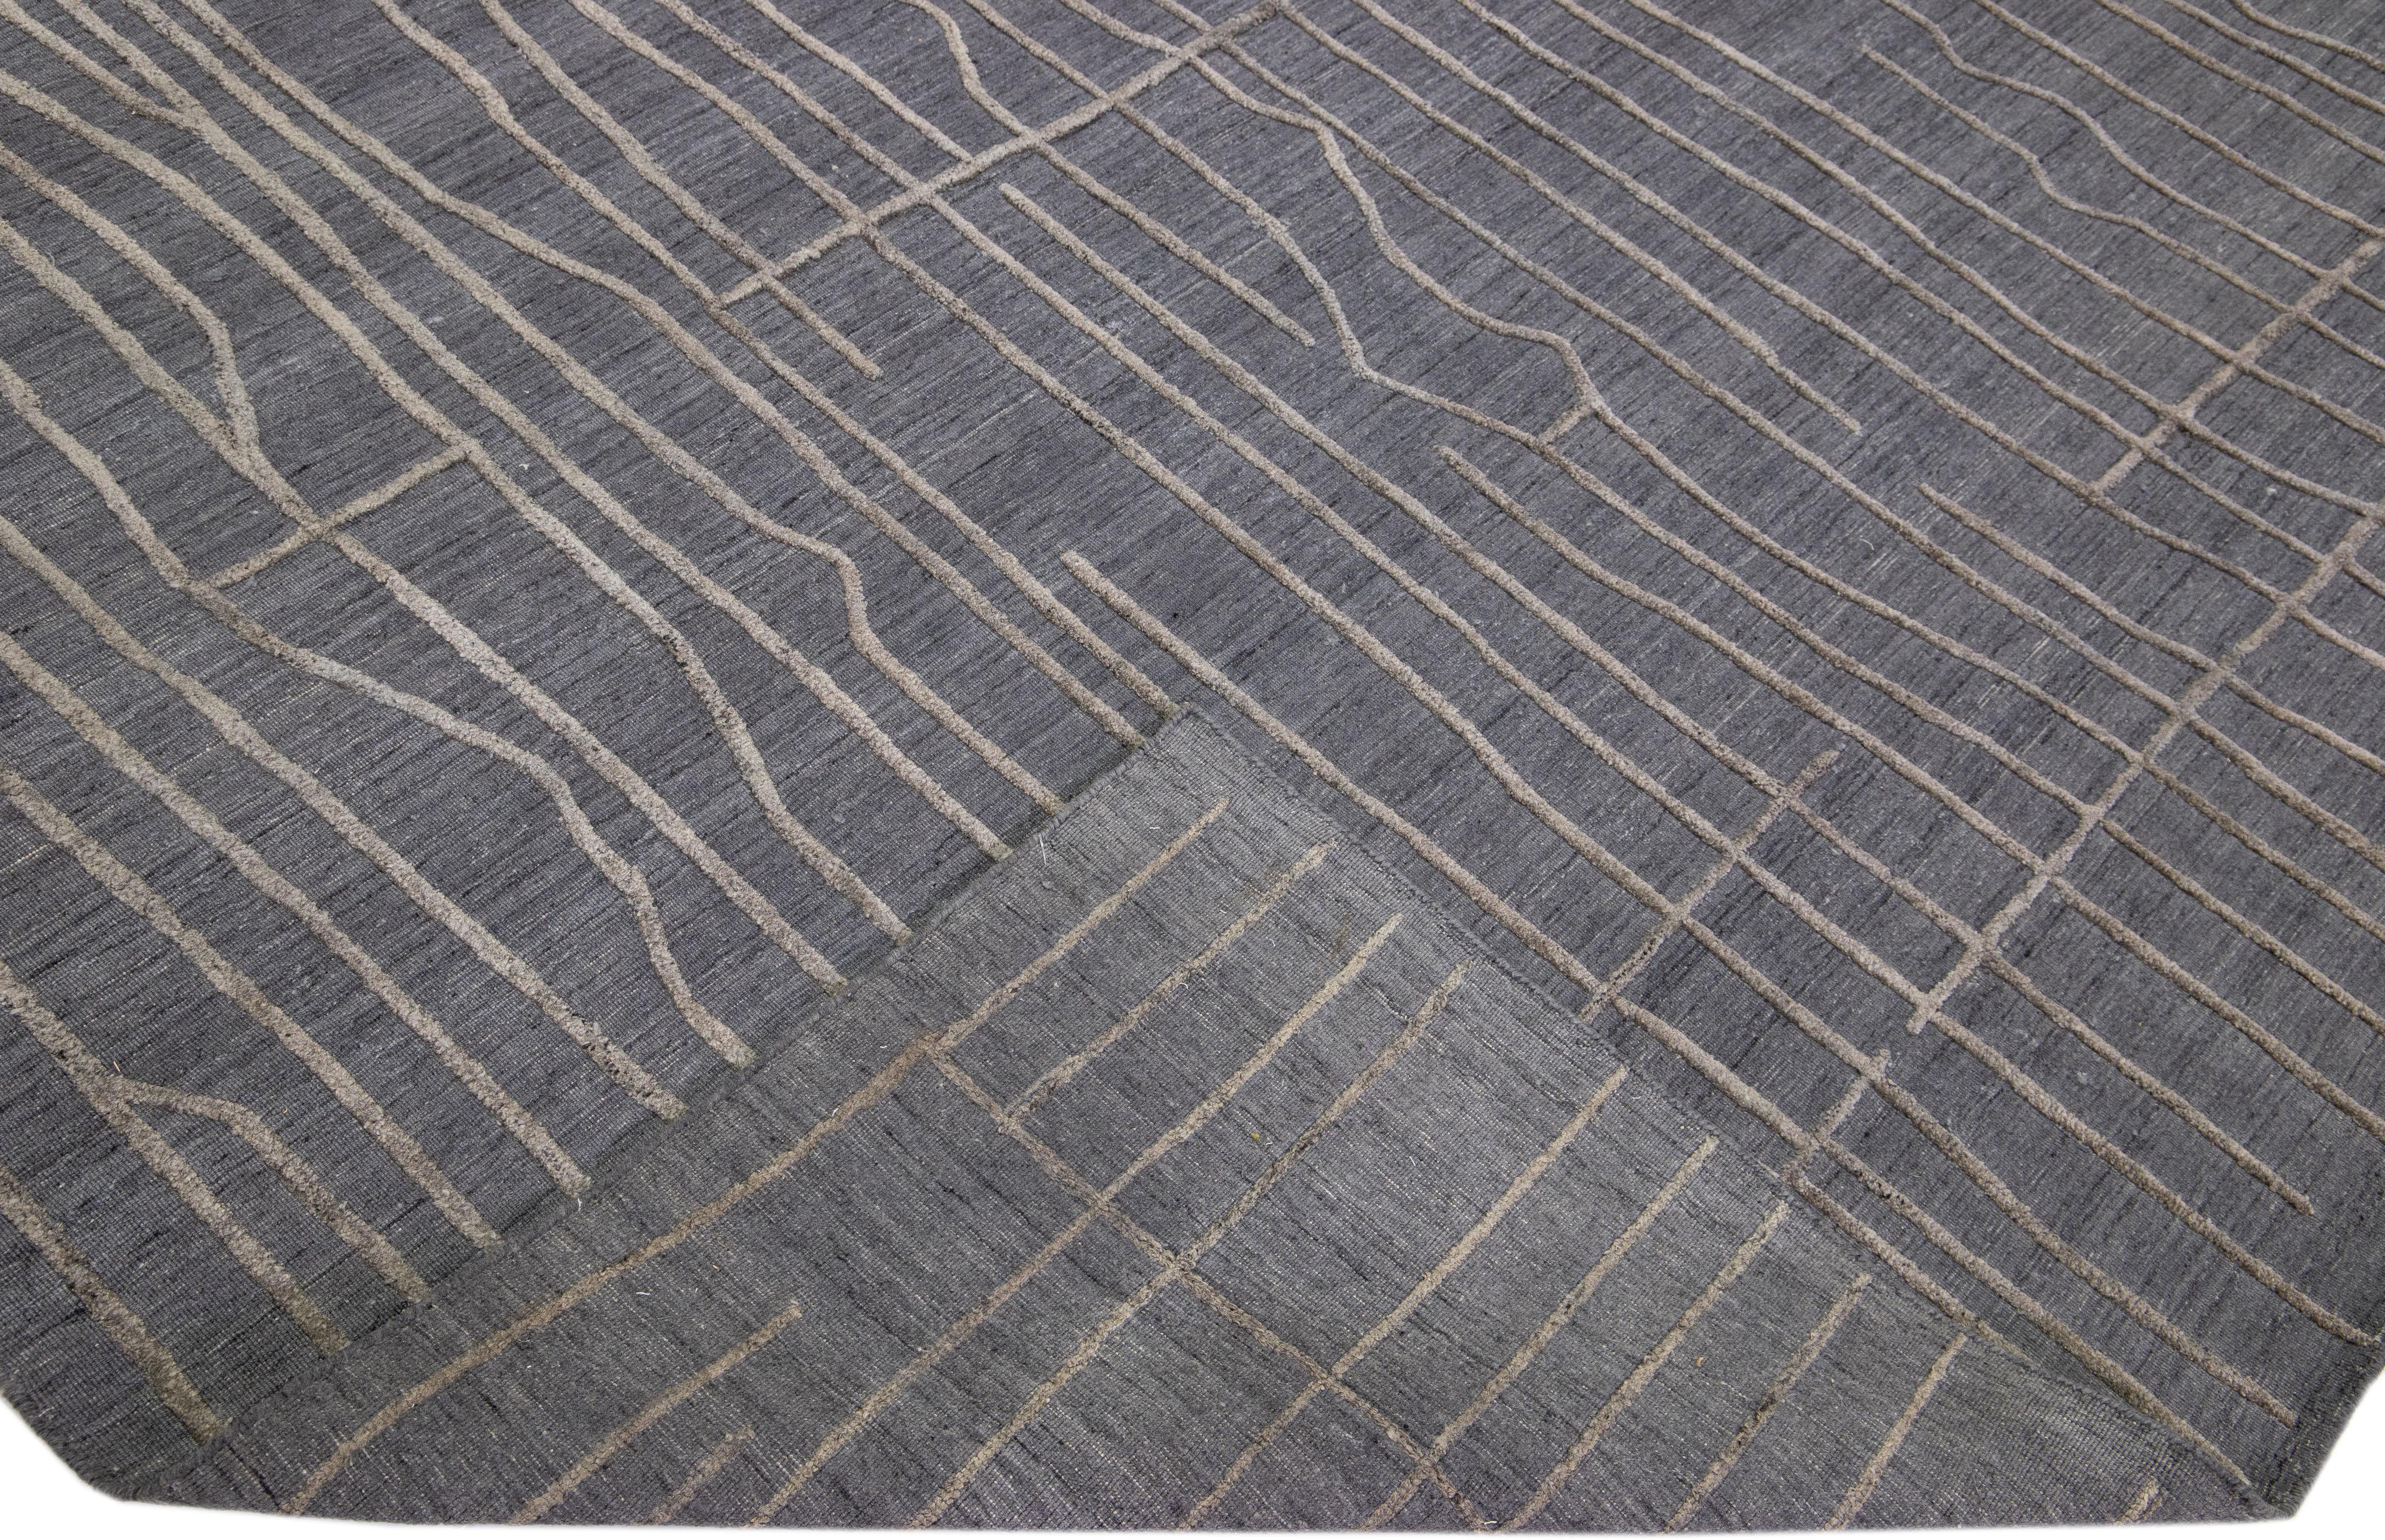 Beautiful Contemporary Thom Filicia Home Collection Rugs. This Indian hand-woven rug is made of wool & viscose and has a charcoal color field and gray accents all over the design. 
Thom Filicia´s eye for exquisite detailing and beautiful texture